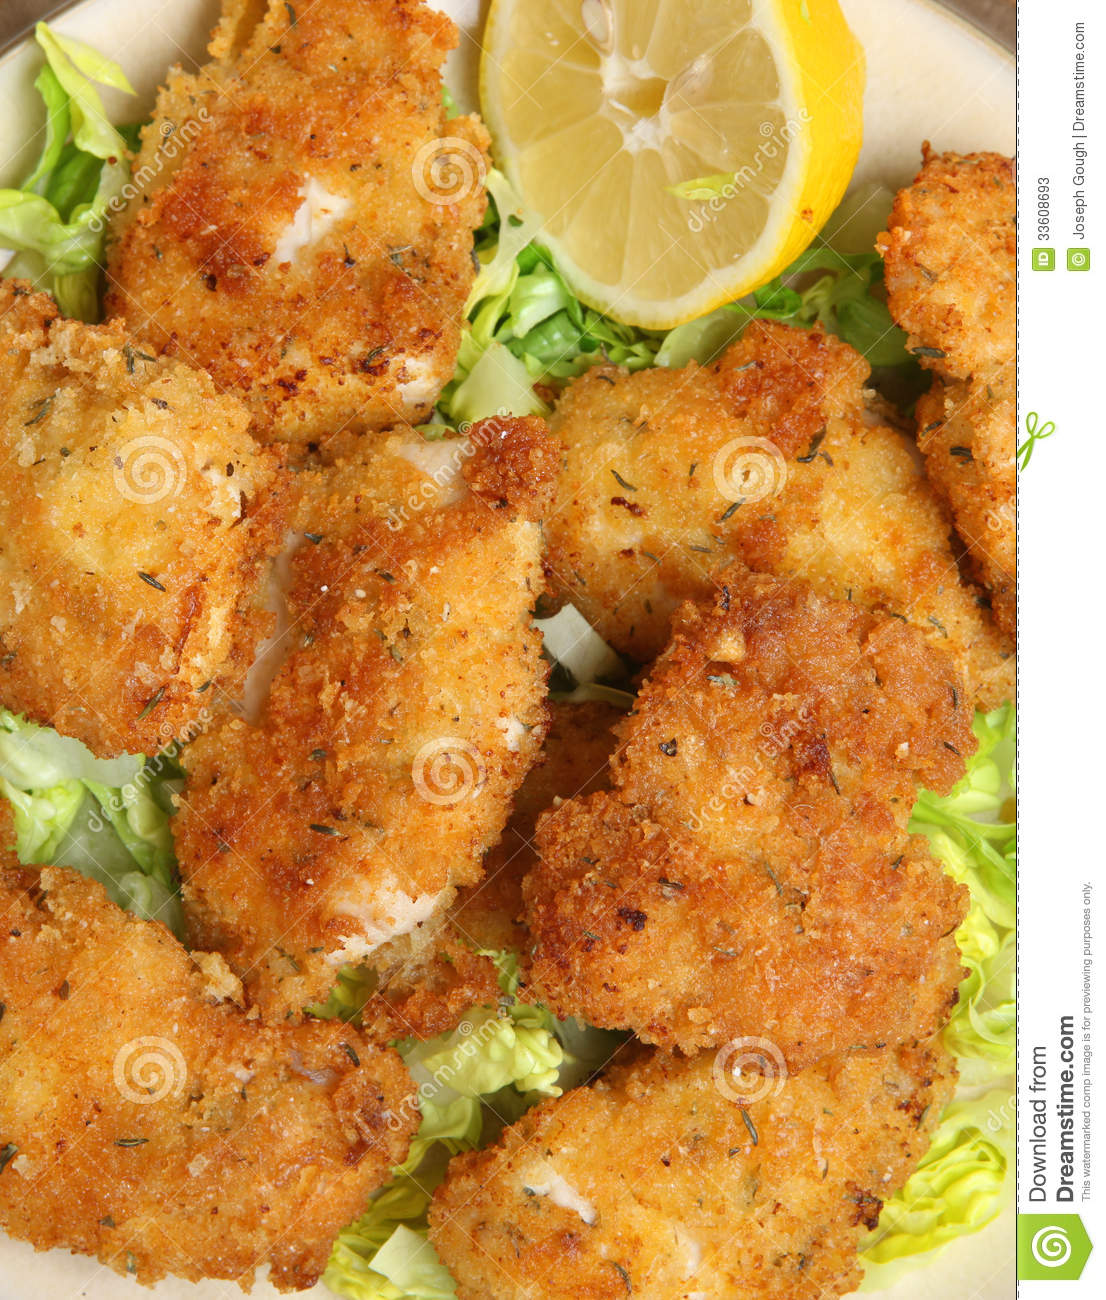 Italian Breaded Chicken With Parmesan Cheese Stock Photos   Image